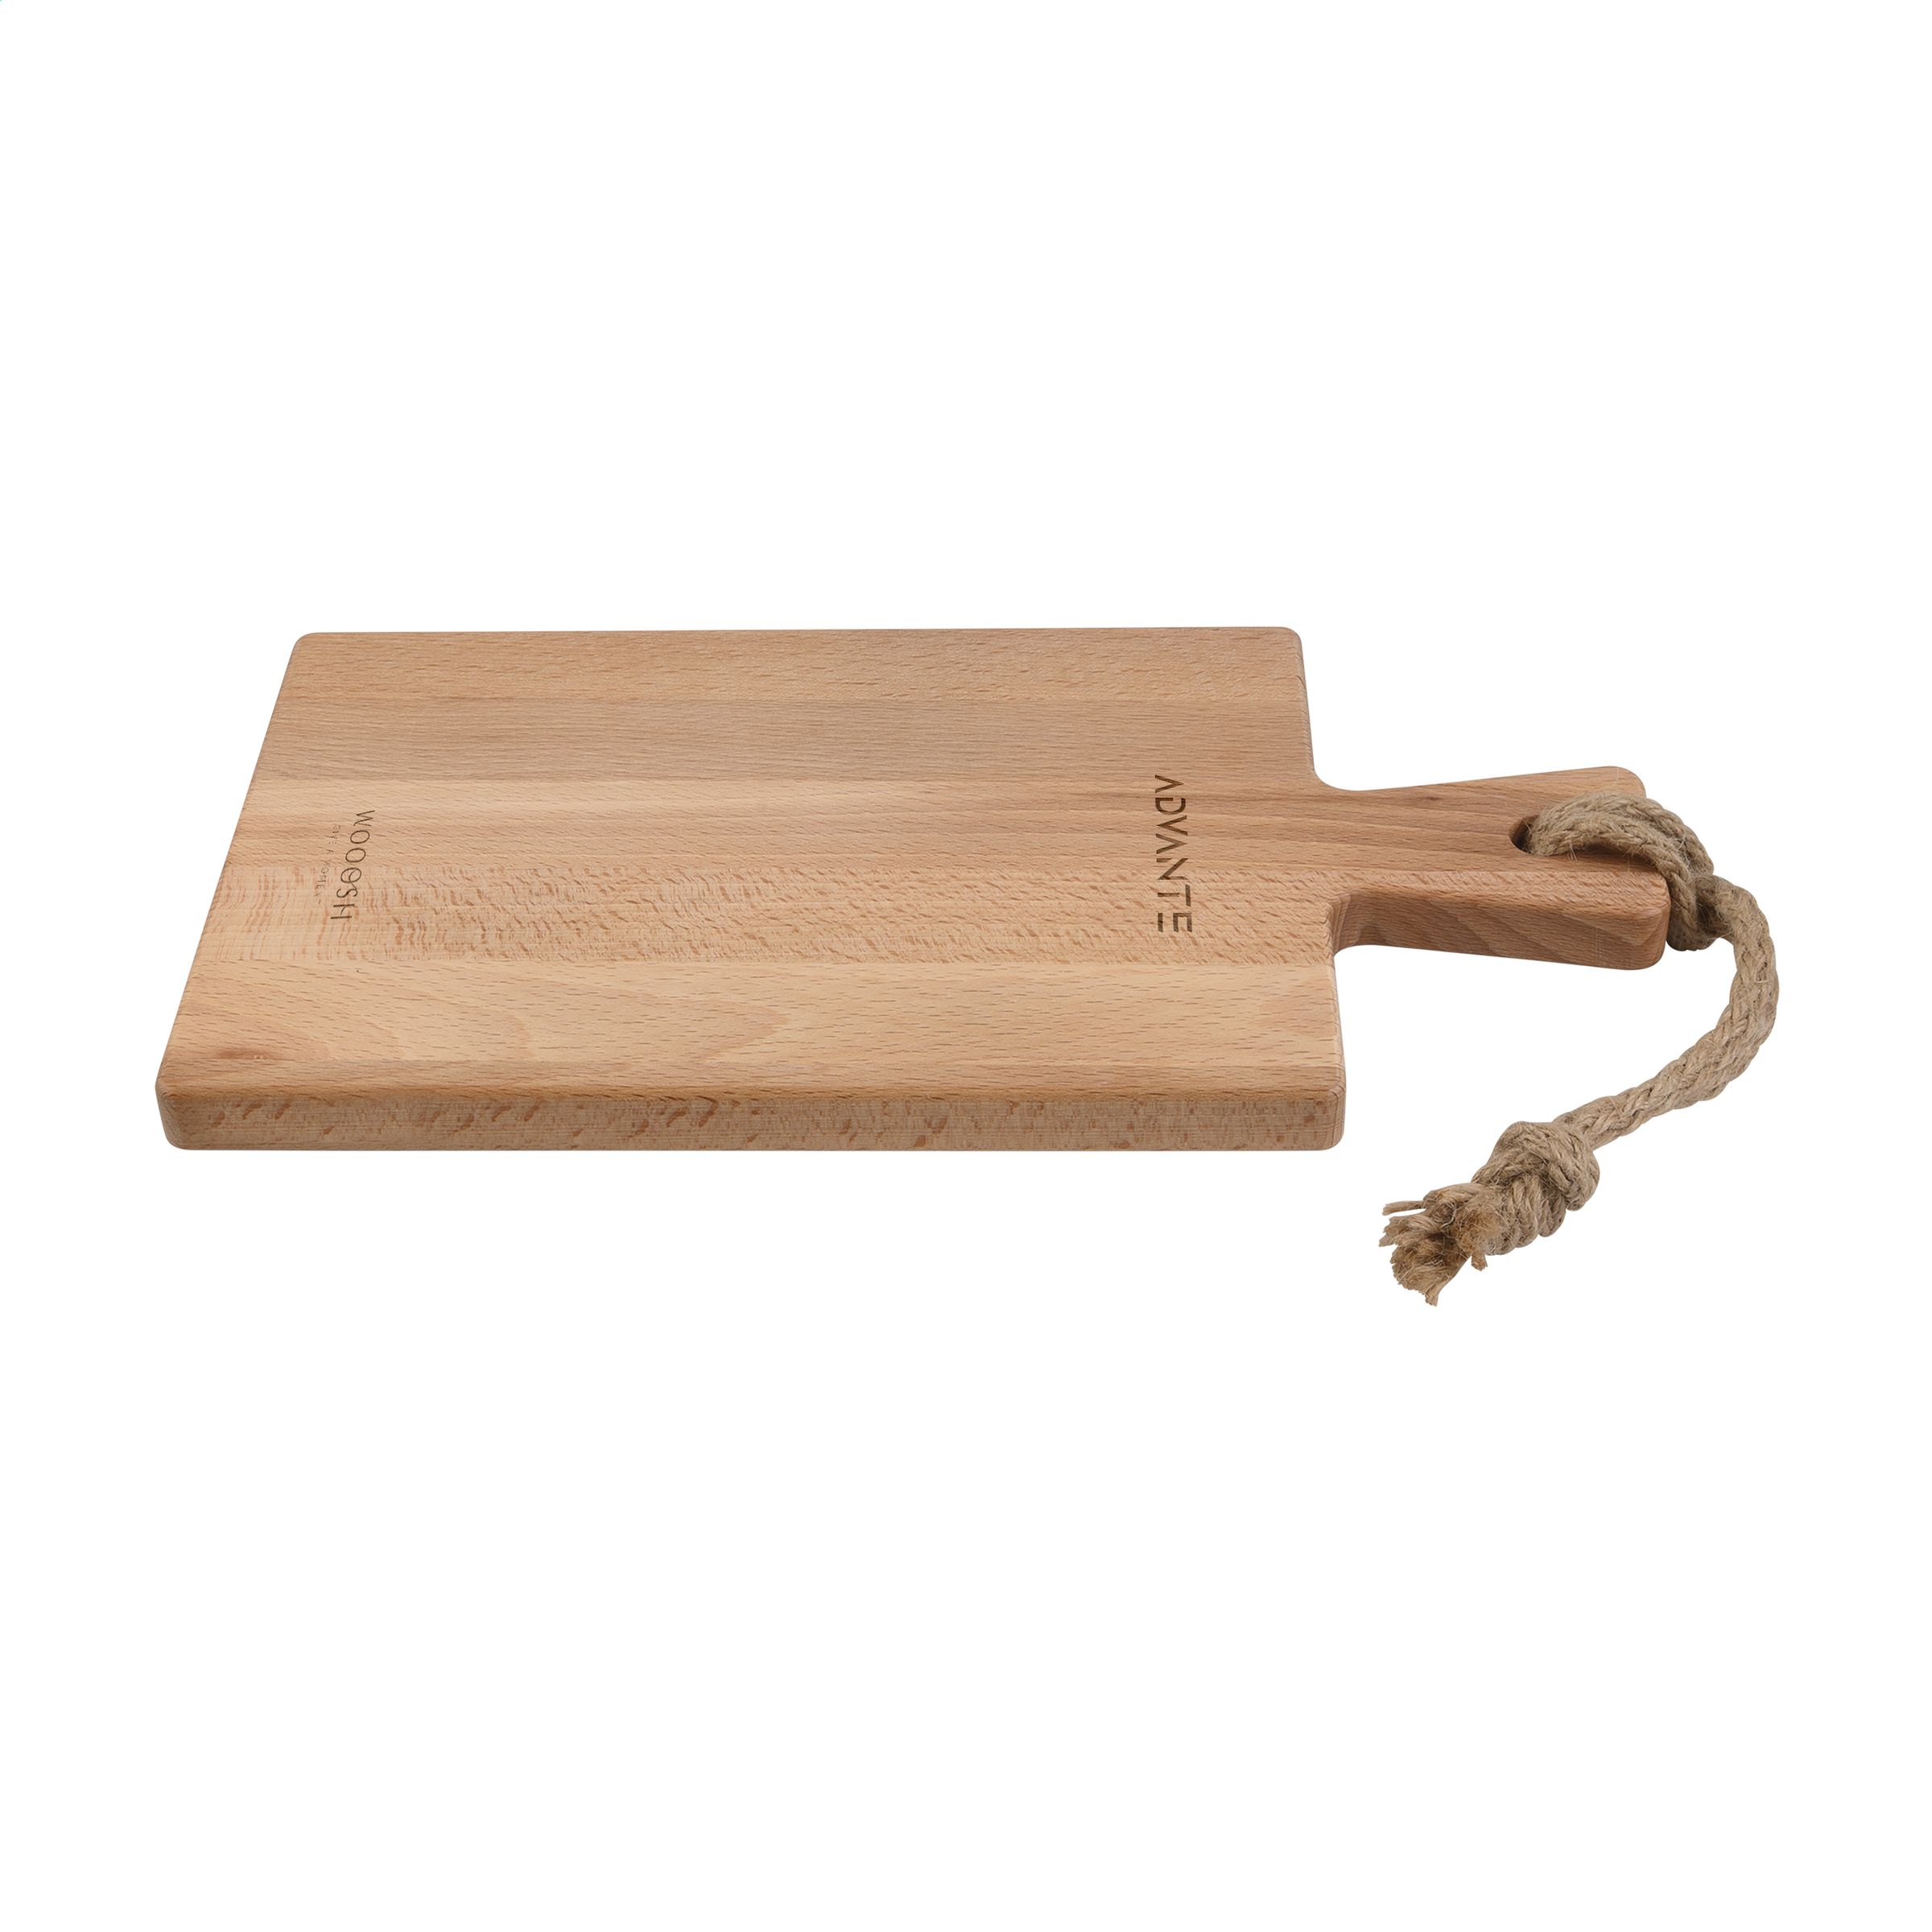 Decorative Beech Wood Cutting Board with Jute Hanging Cord - Llanidloes